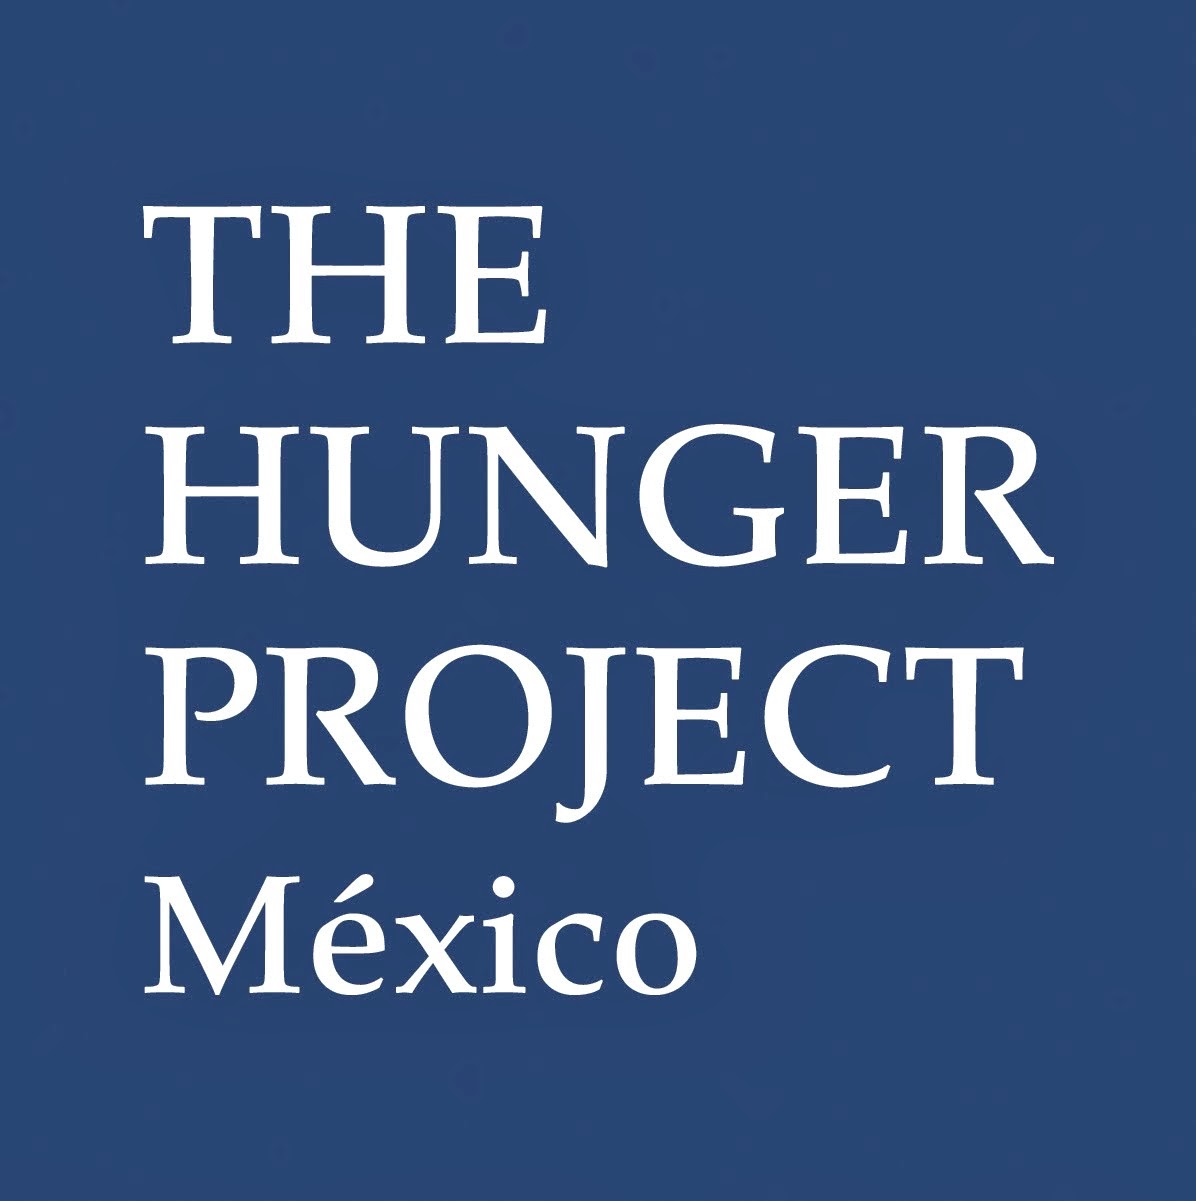 The Hunger Project México